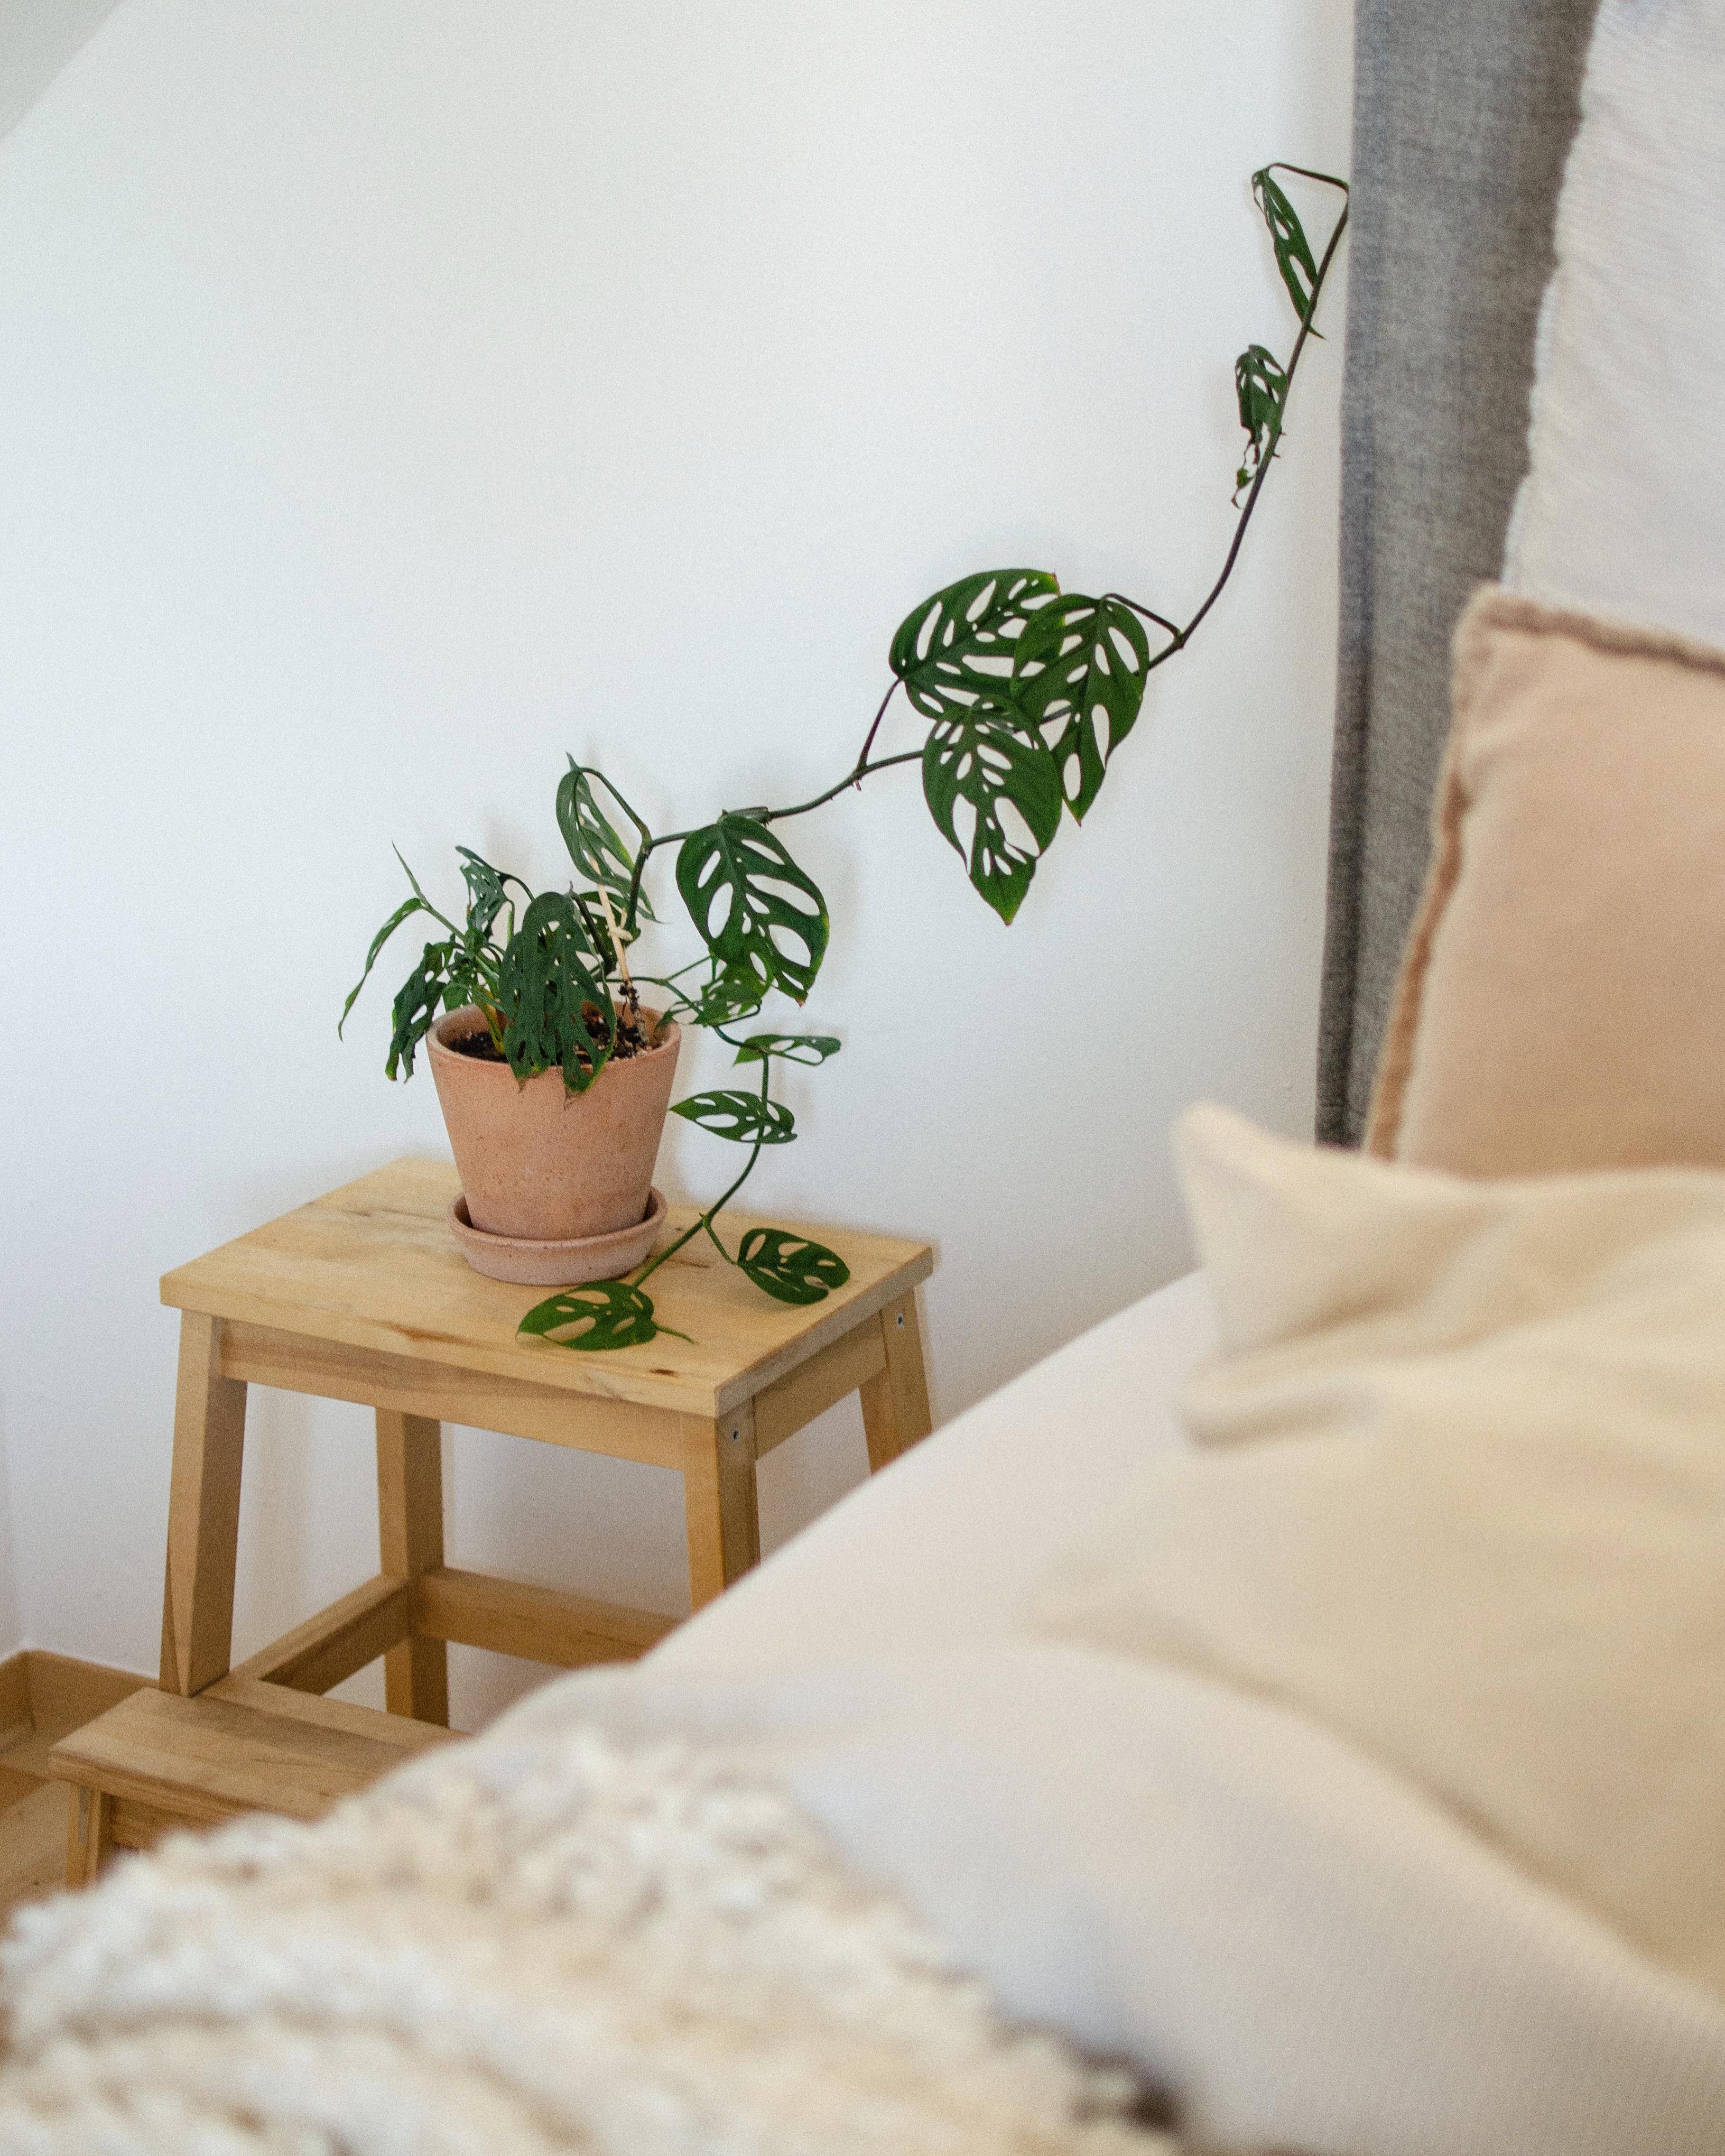 Sundays are for staying in bed. 🧘🏻‍♀️ #bedroom #home #bed #ikeahack #plant #interior 